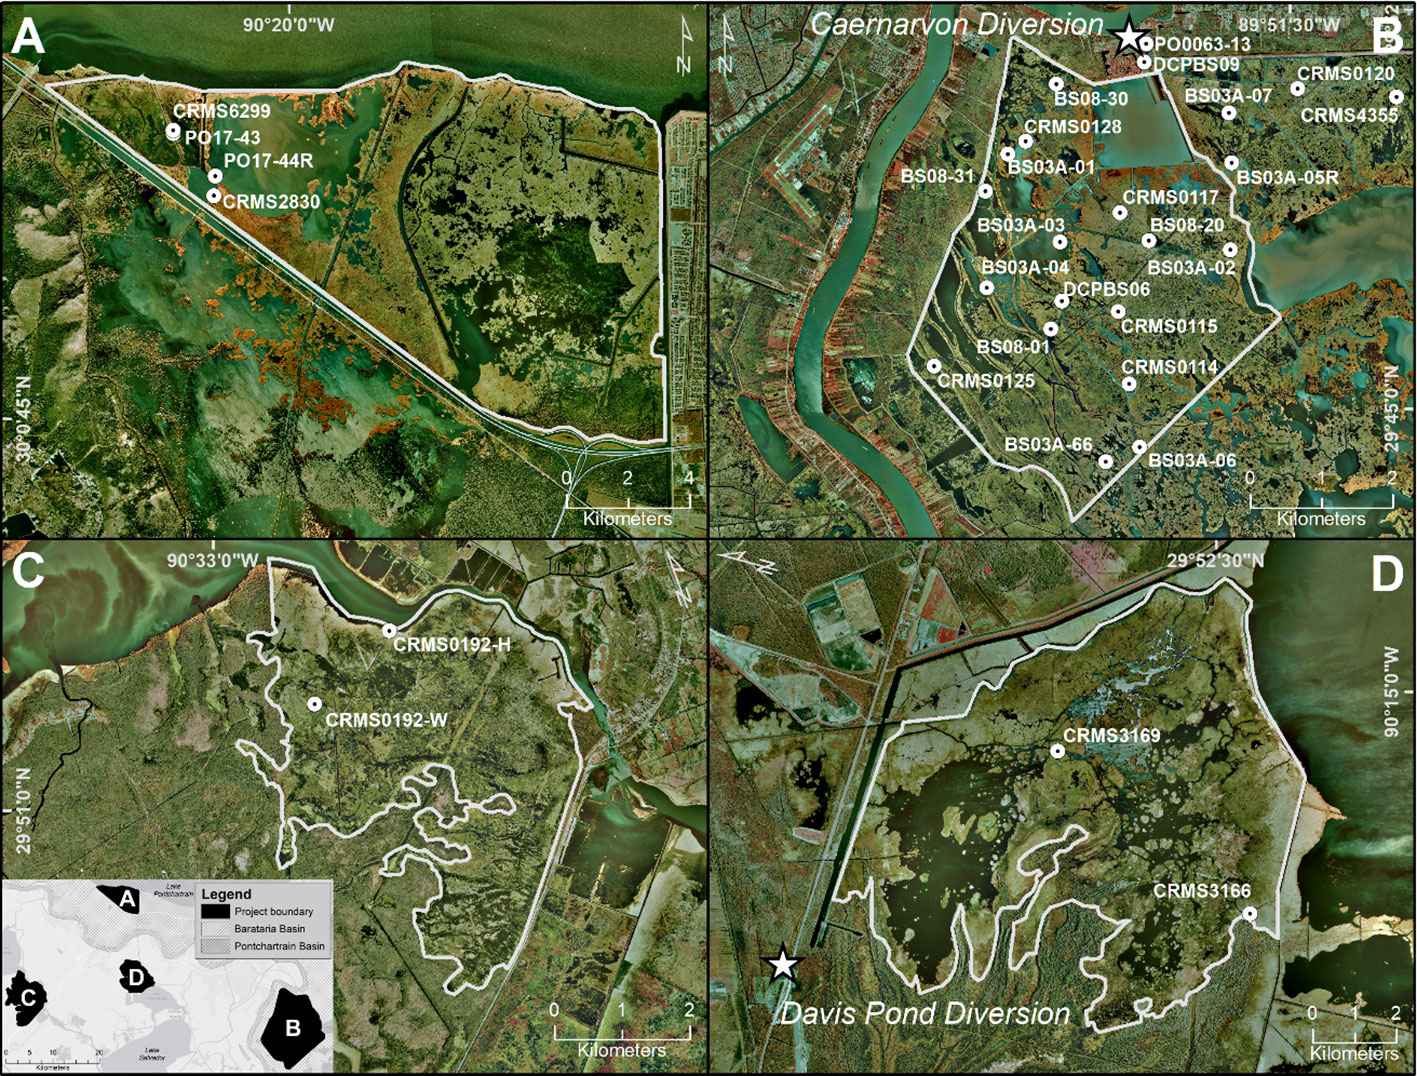 DayZ Overview Map, DayZ Overview Map with Focus Area from 1…